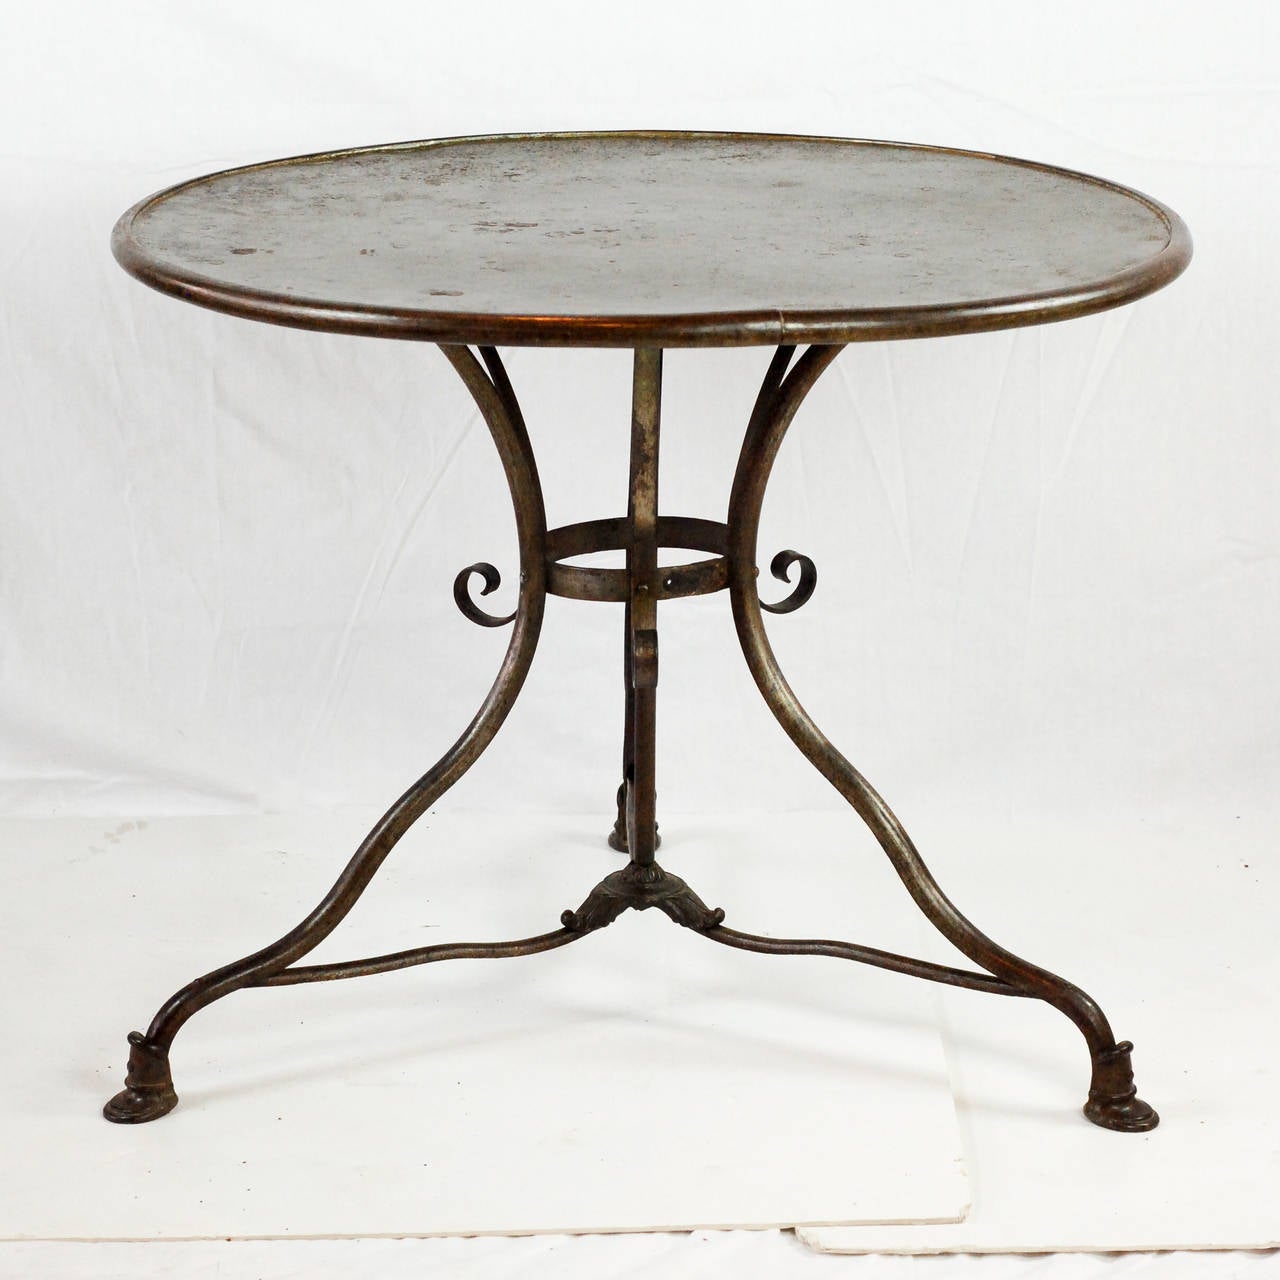 Late 19th century round iron Arras garden table with strapped and riveted base